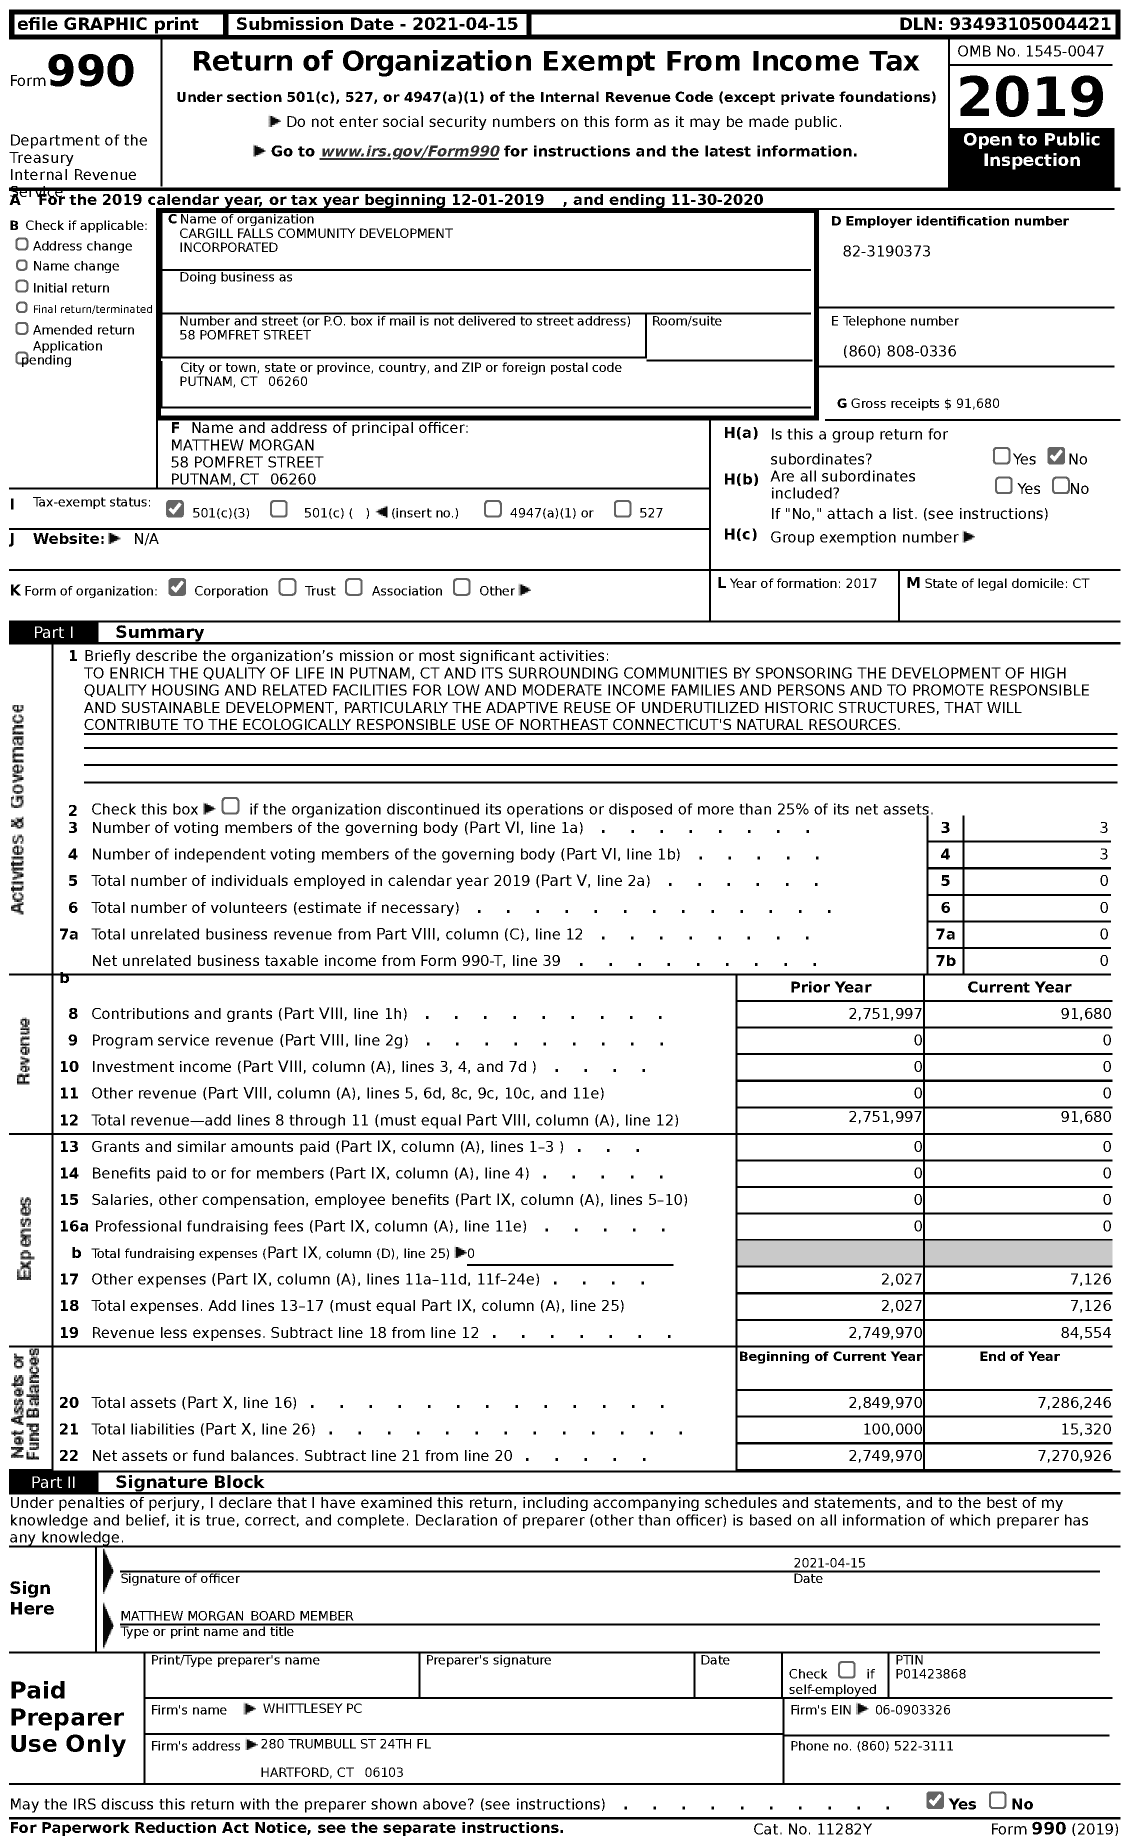 Image of first page of 2019 Form 990 for Cargill Falls Community Development Incorporated